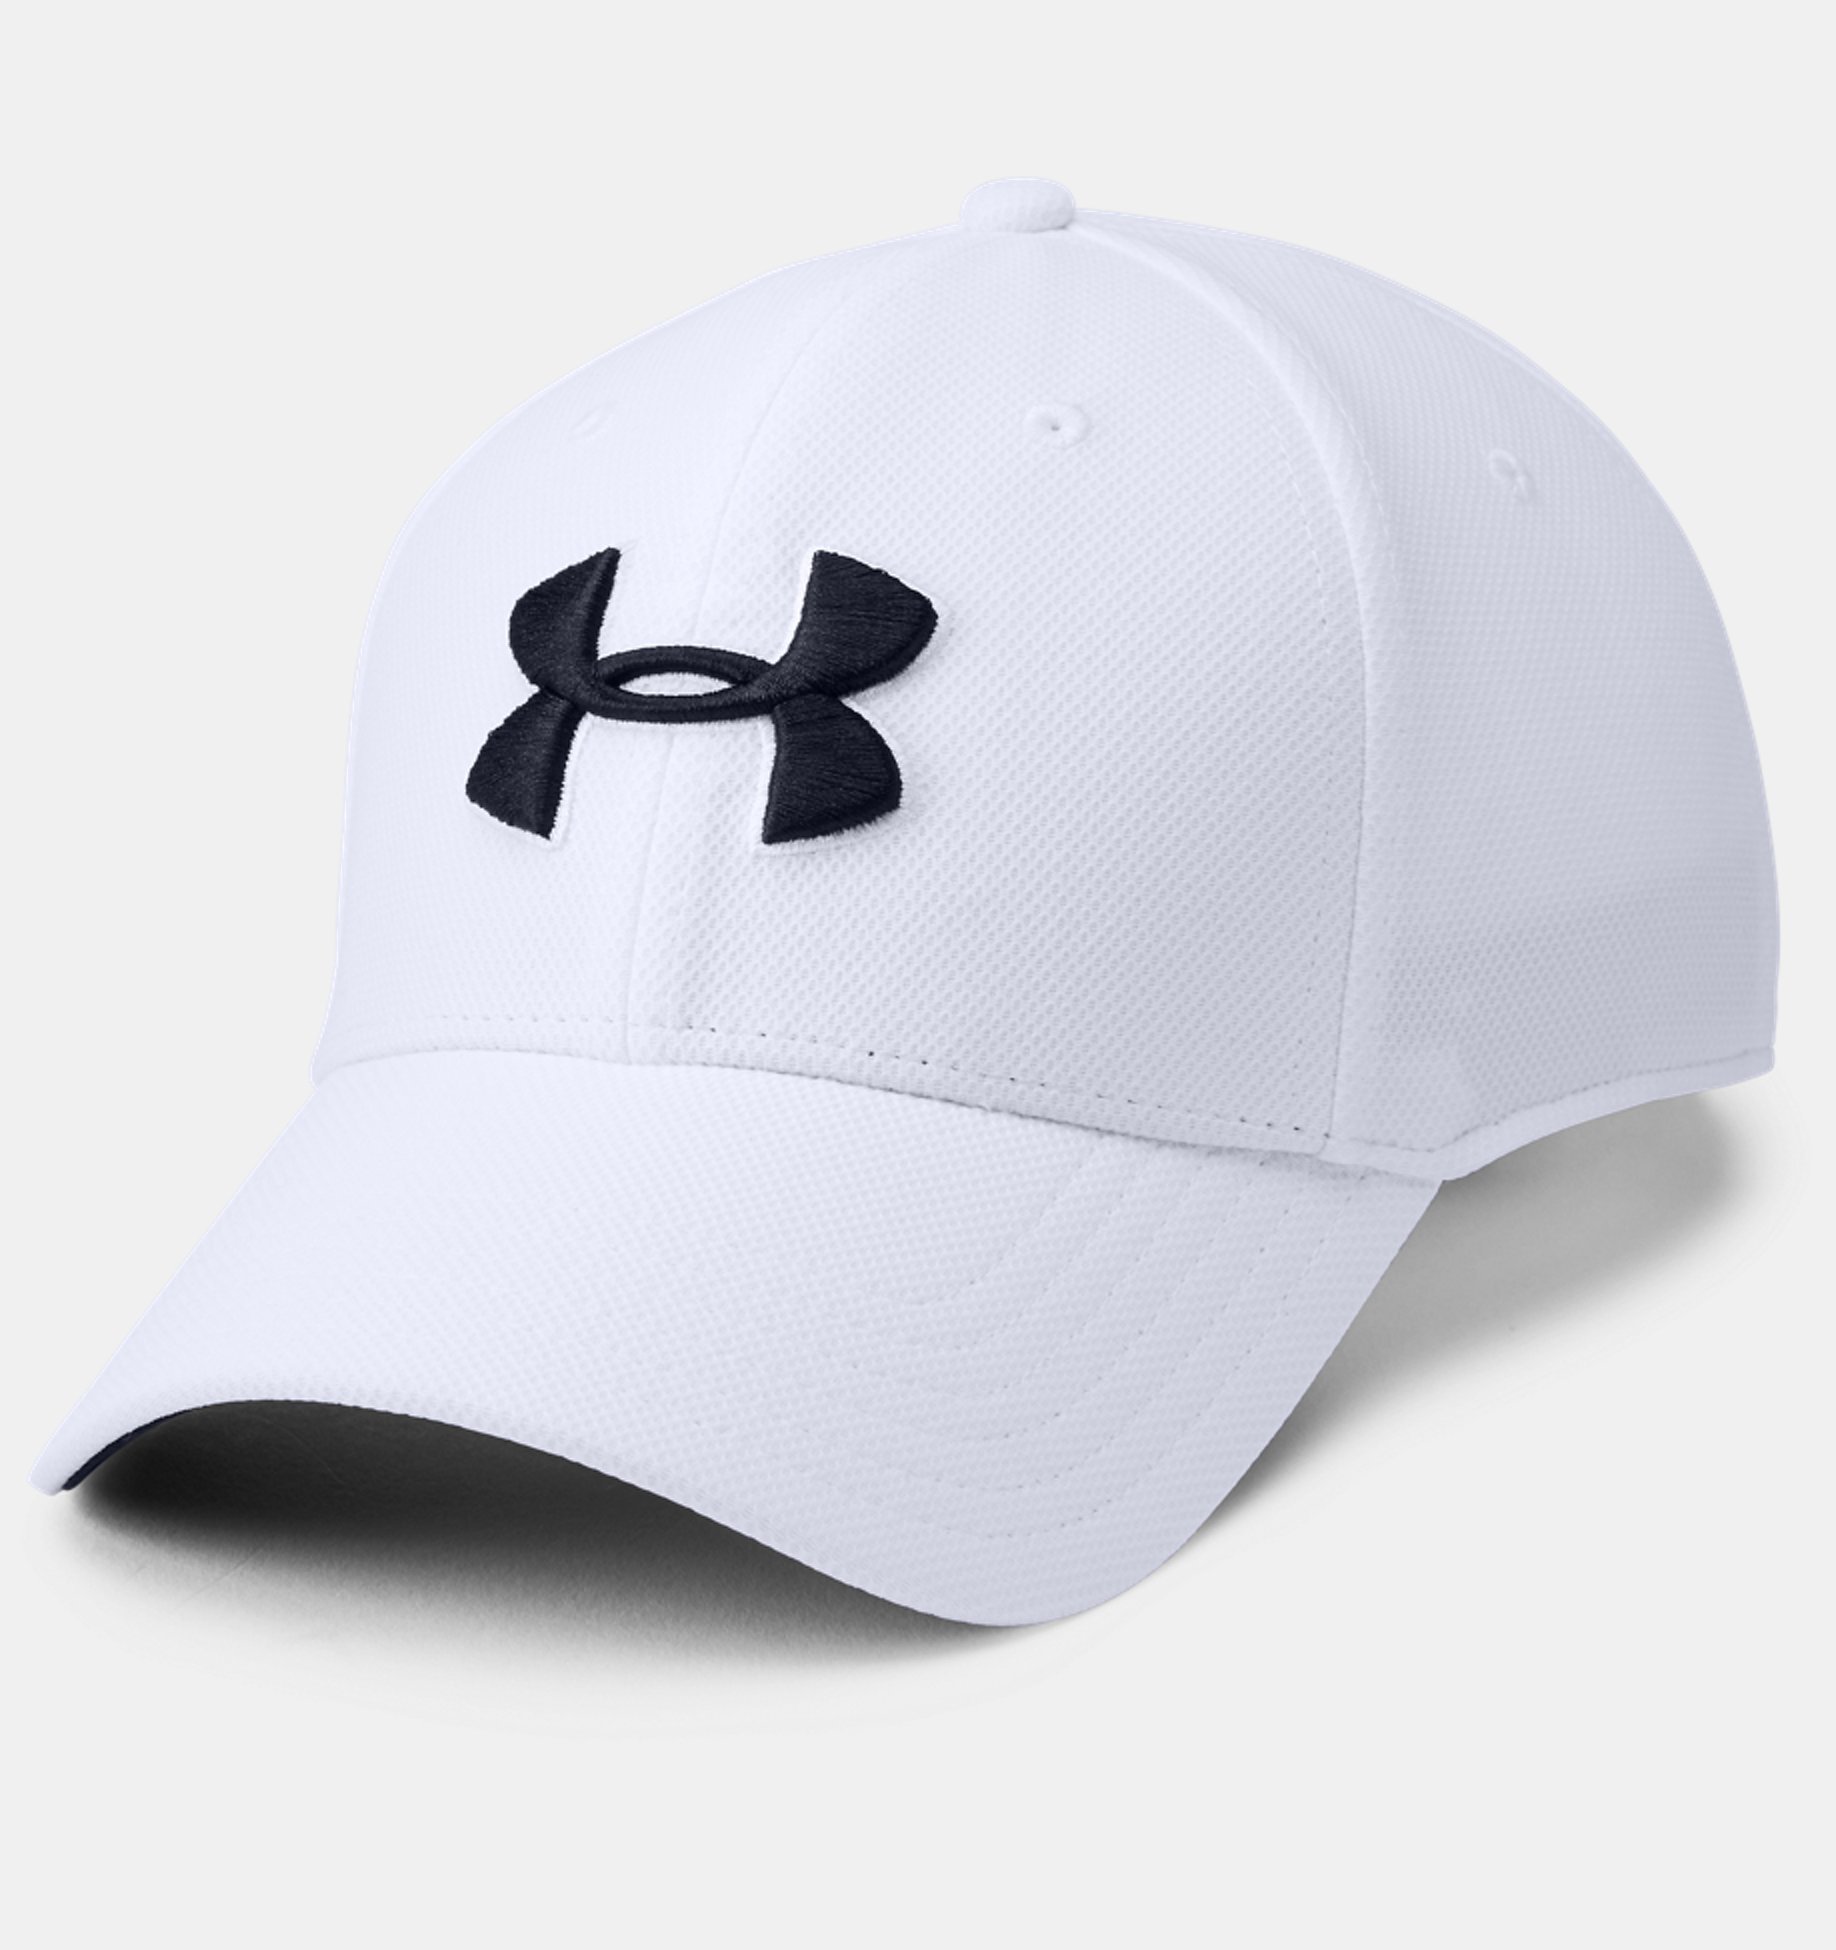 Under Armour Mens Heathered Blitzing 3.0 Cap Hat 